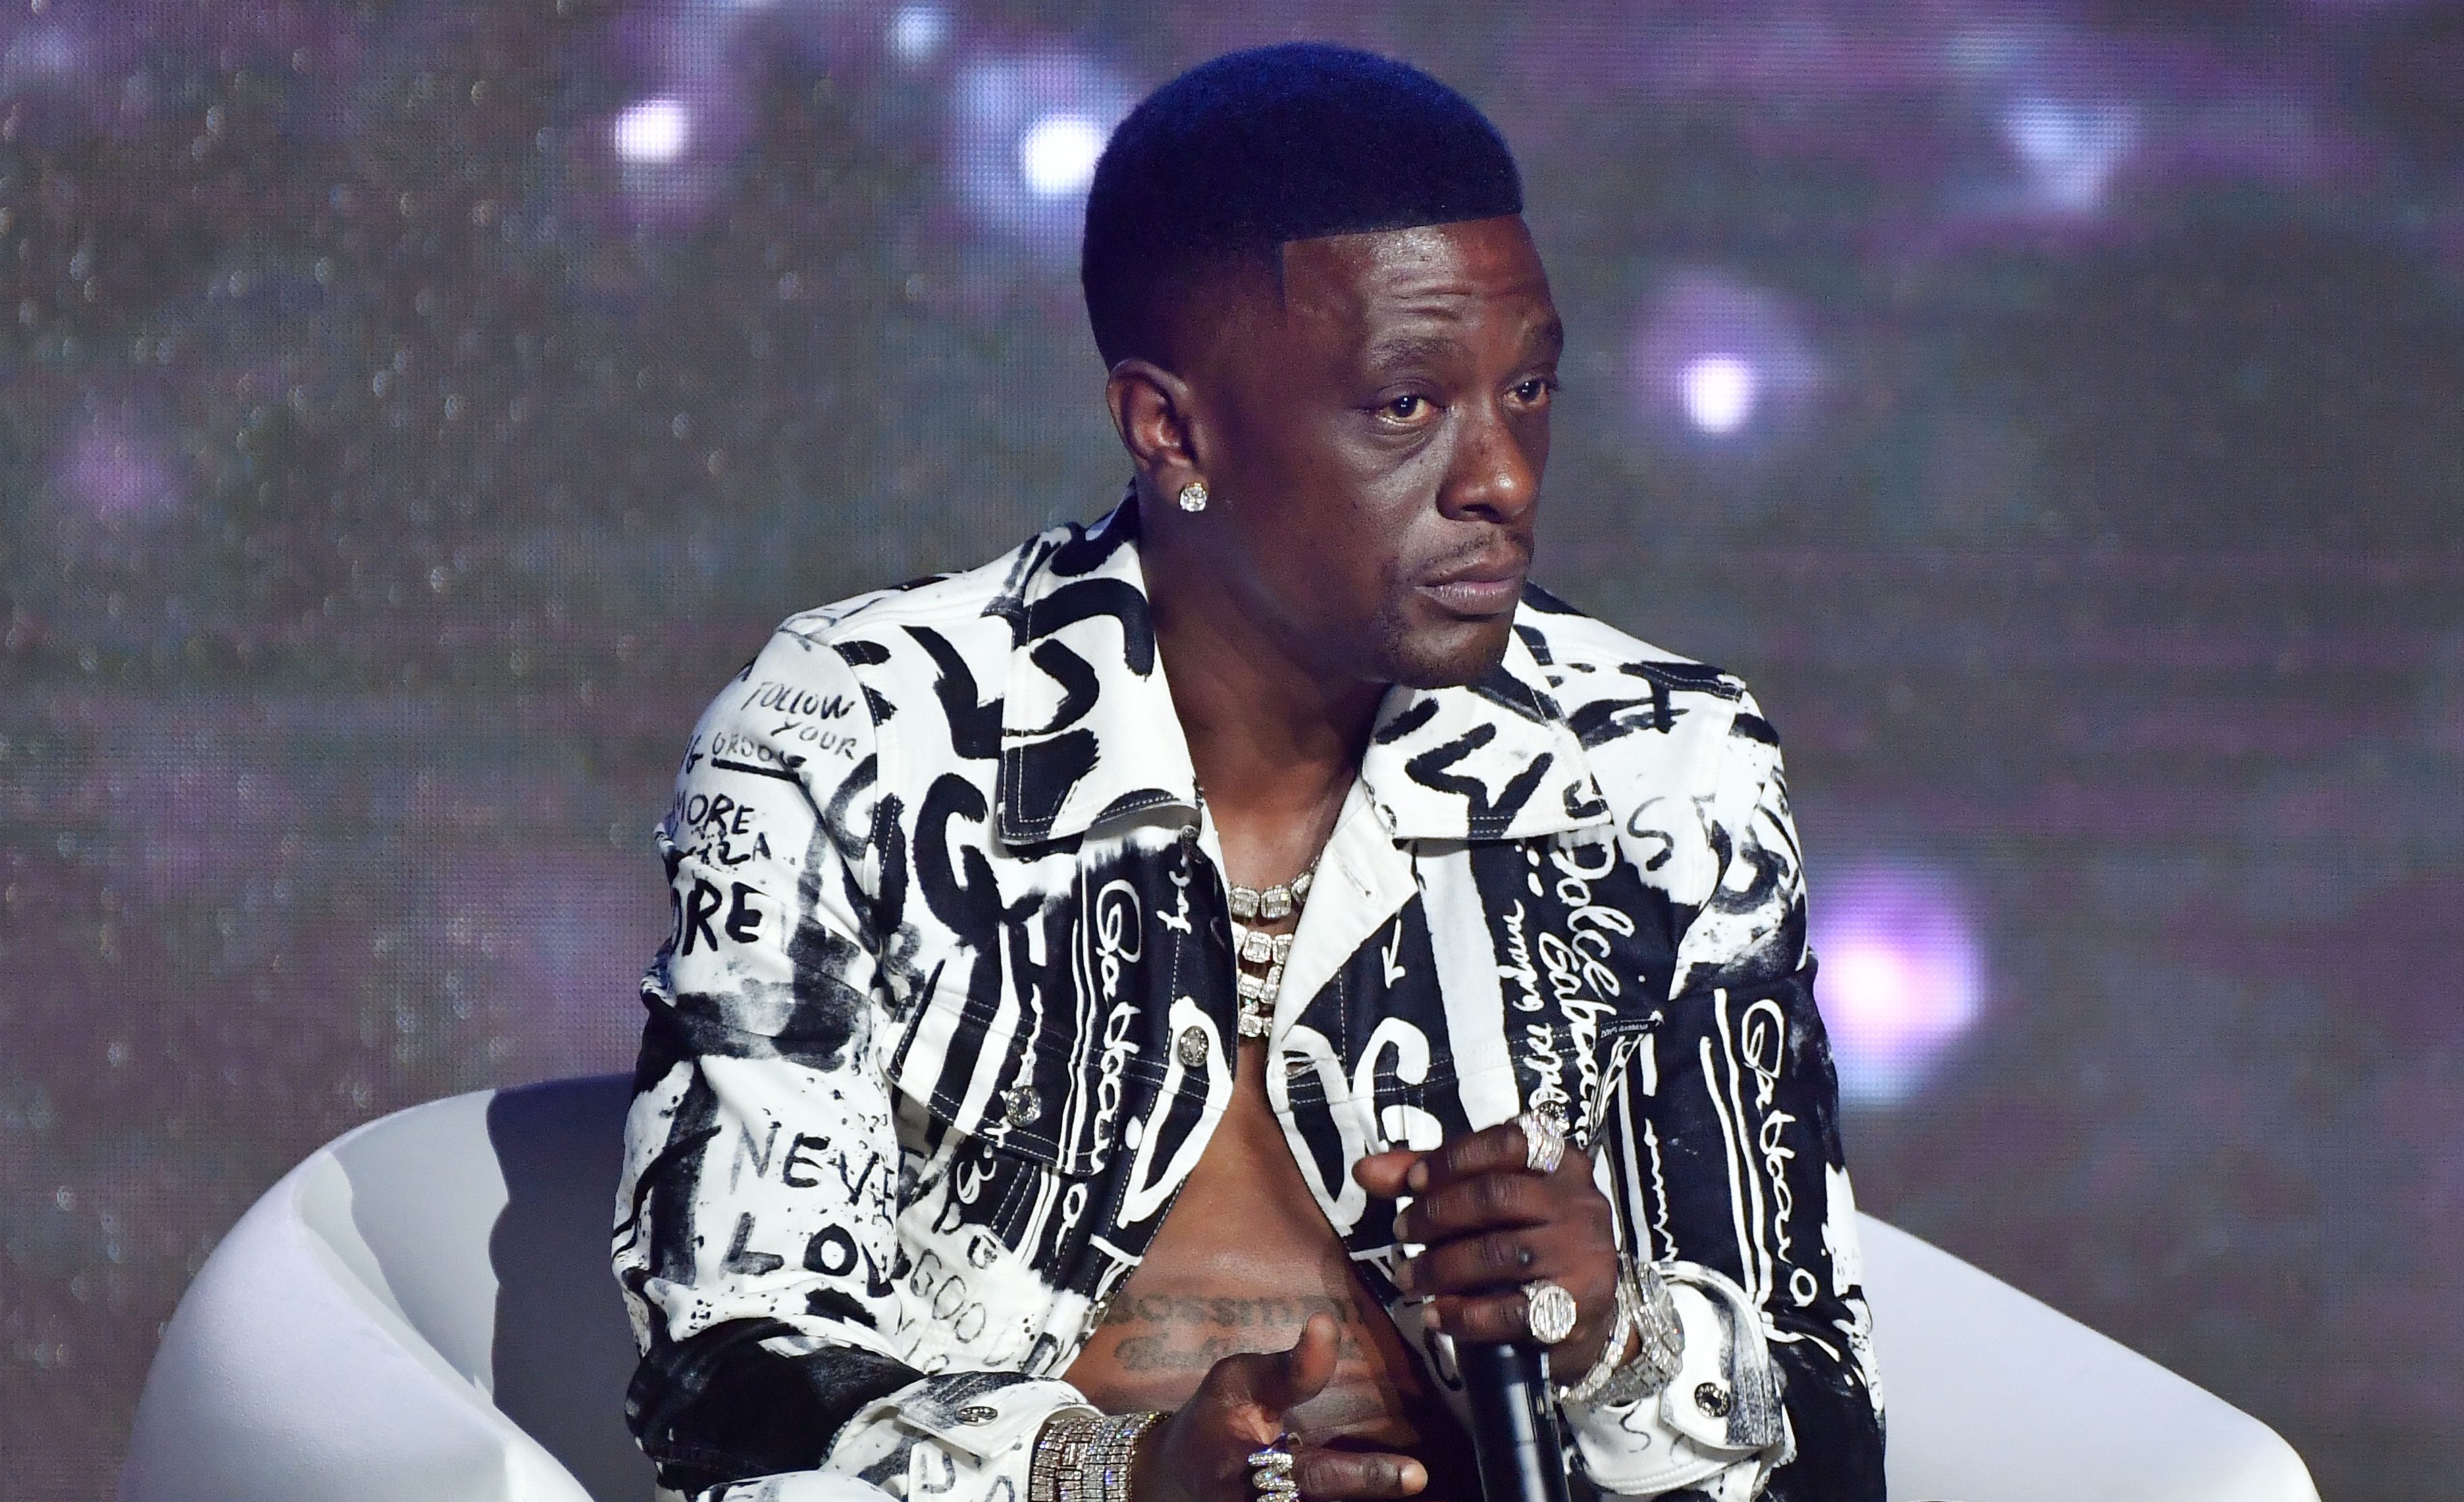 Boosie Badazz Throws A Fit Over Airport Food